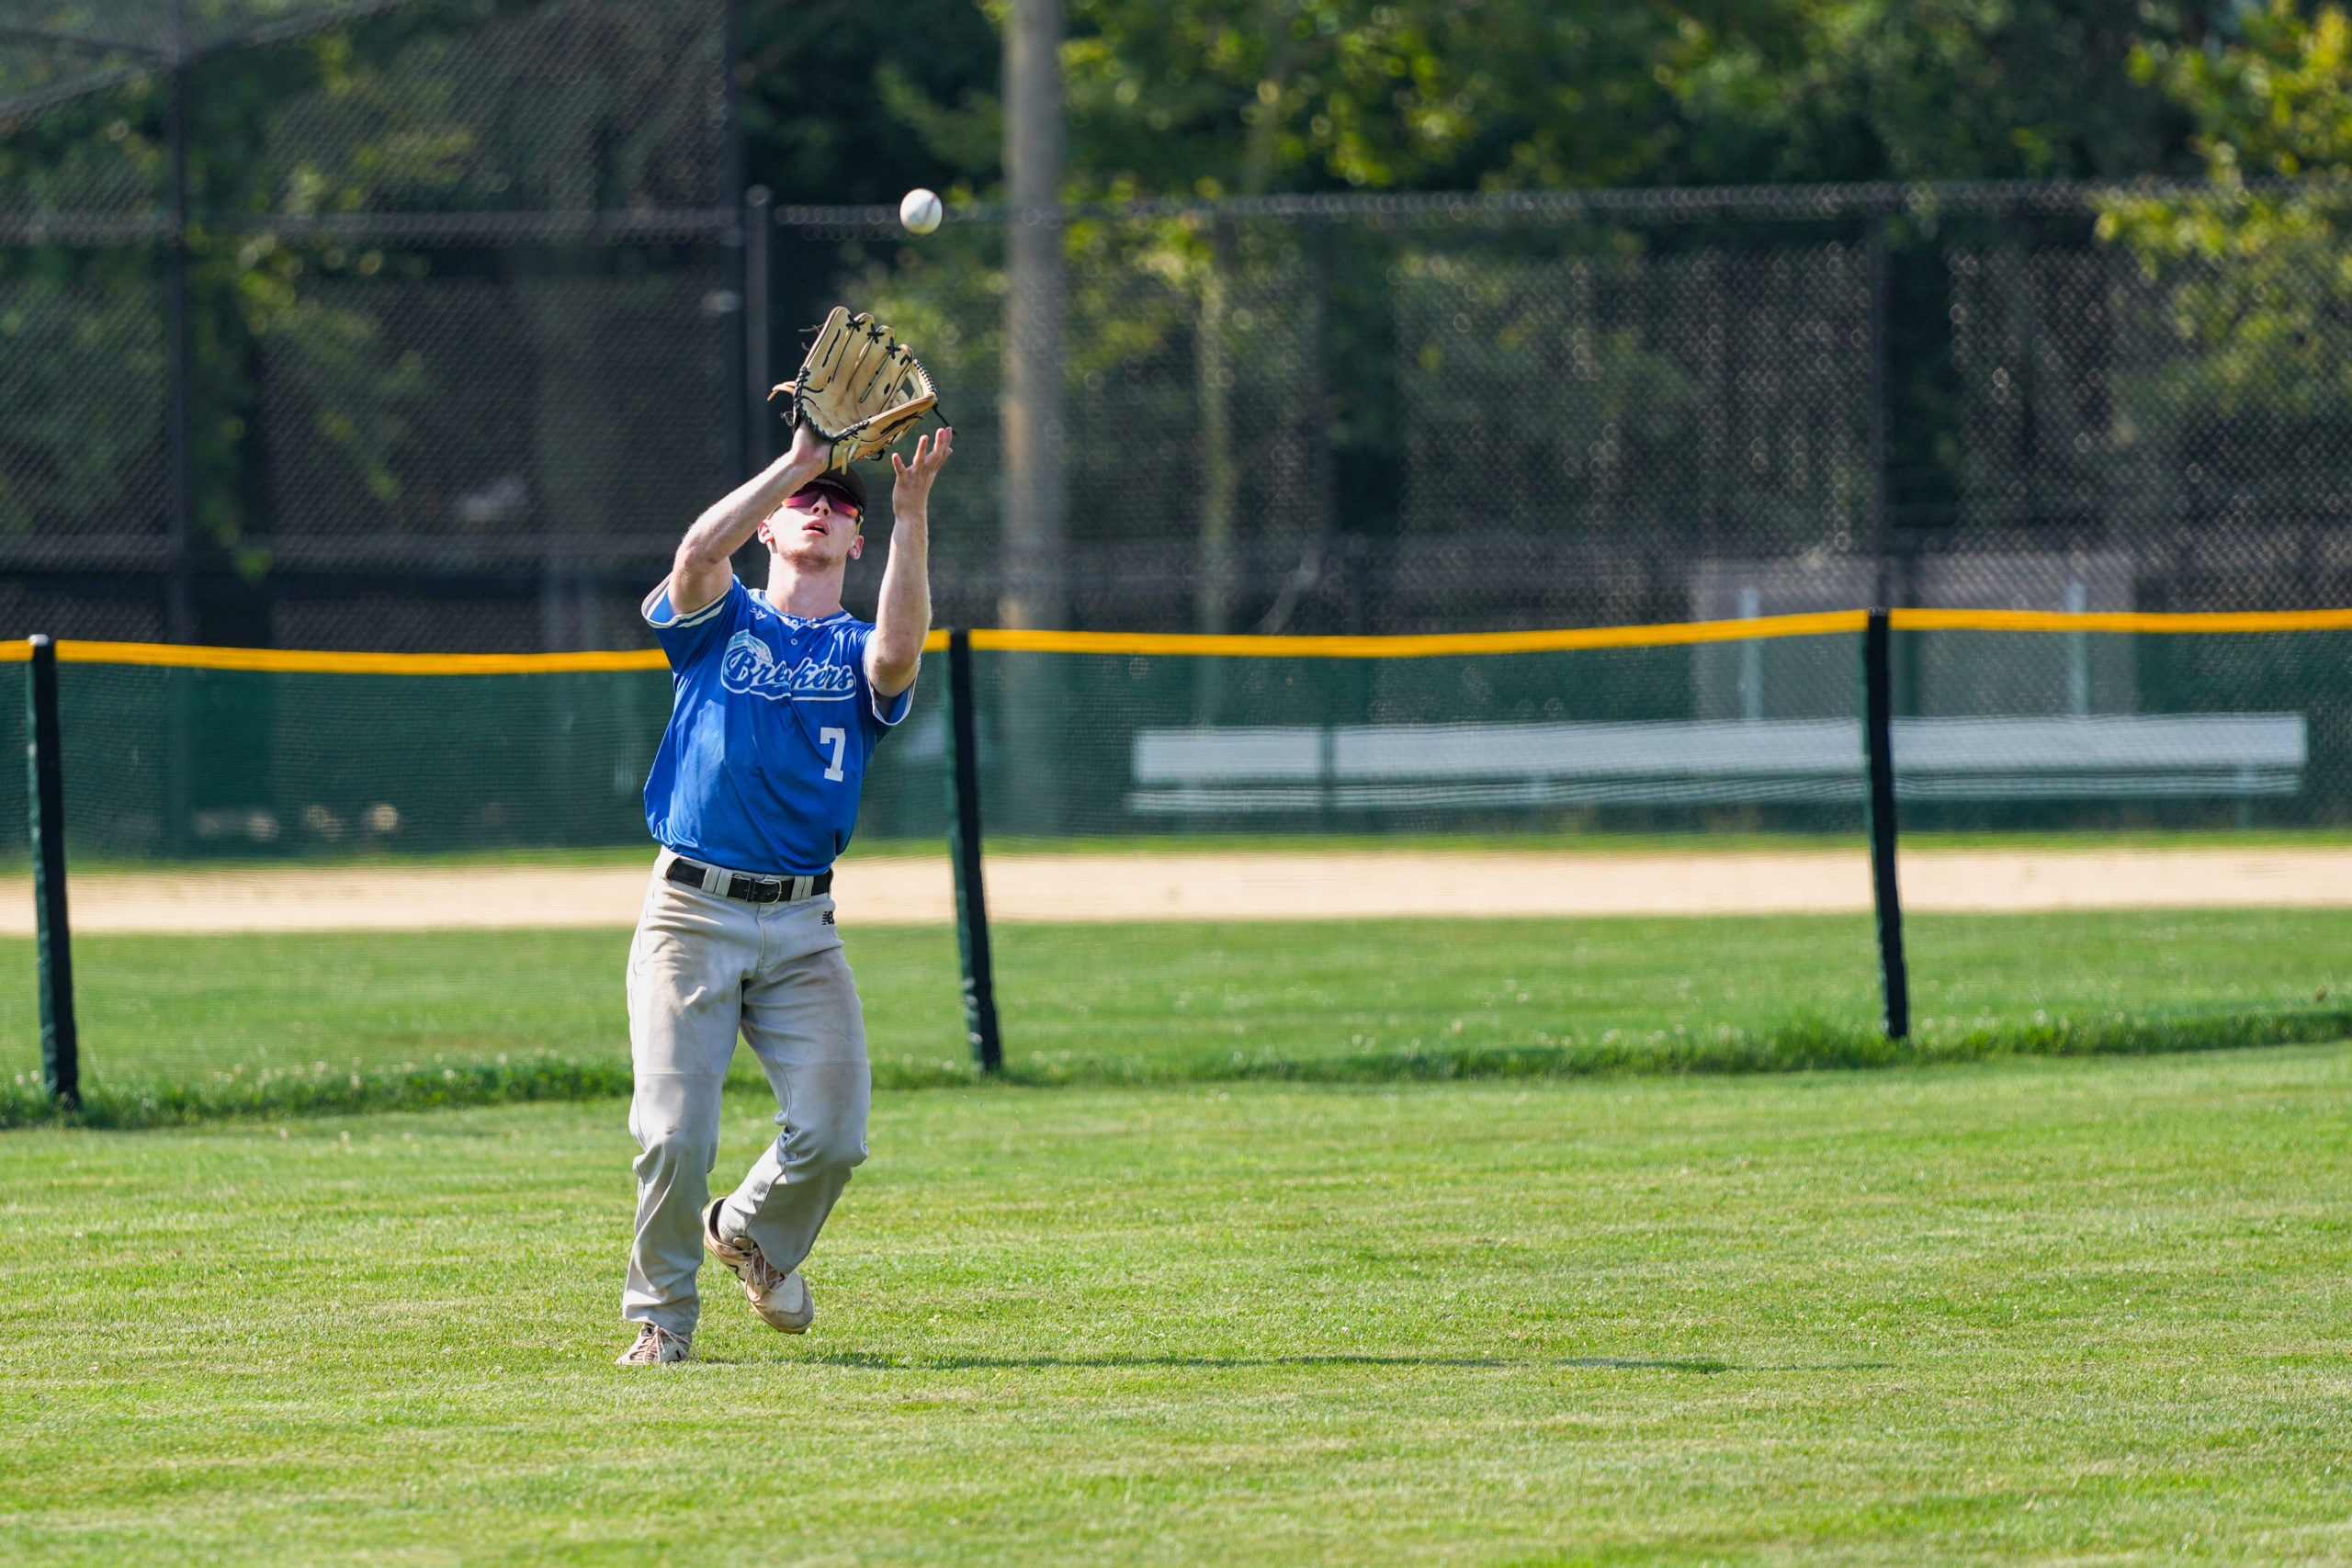 Breaker Tyler Robinson (Dartmouth) settles underneath and catches a fly ball for an out.